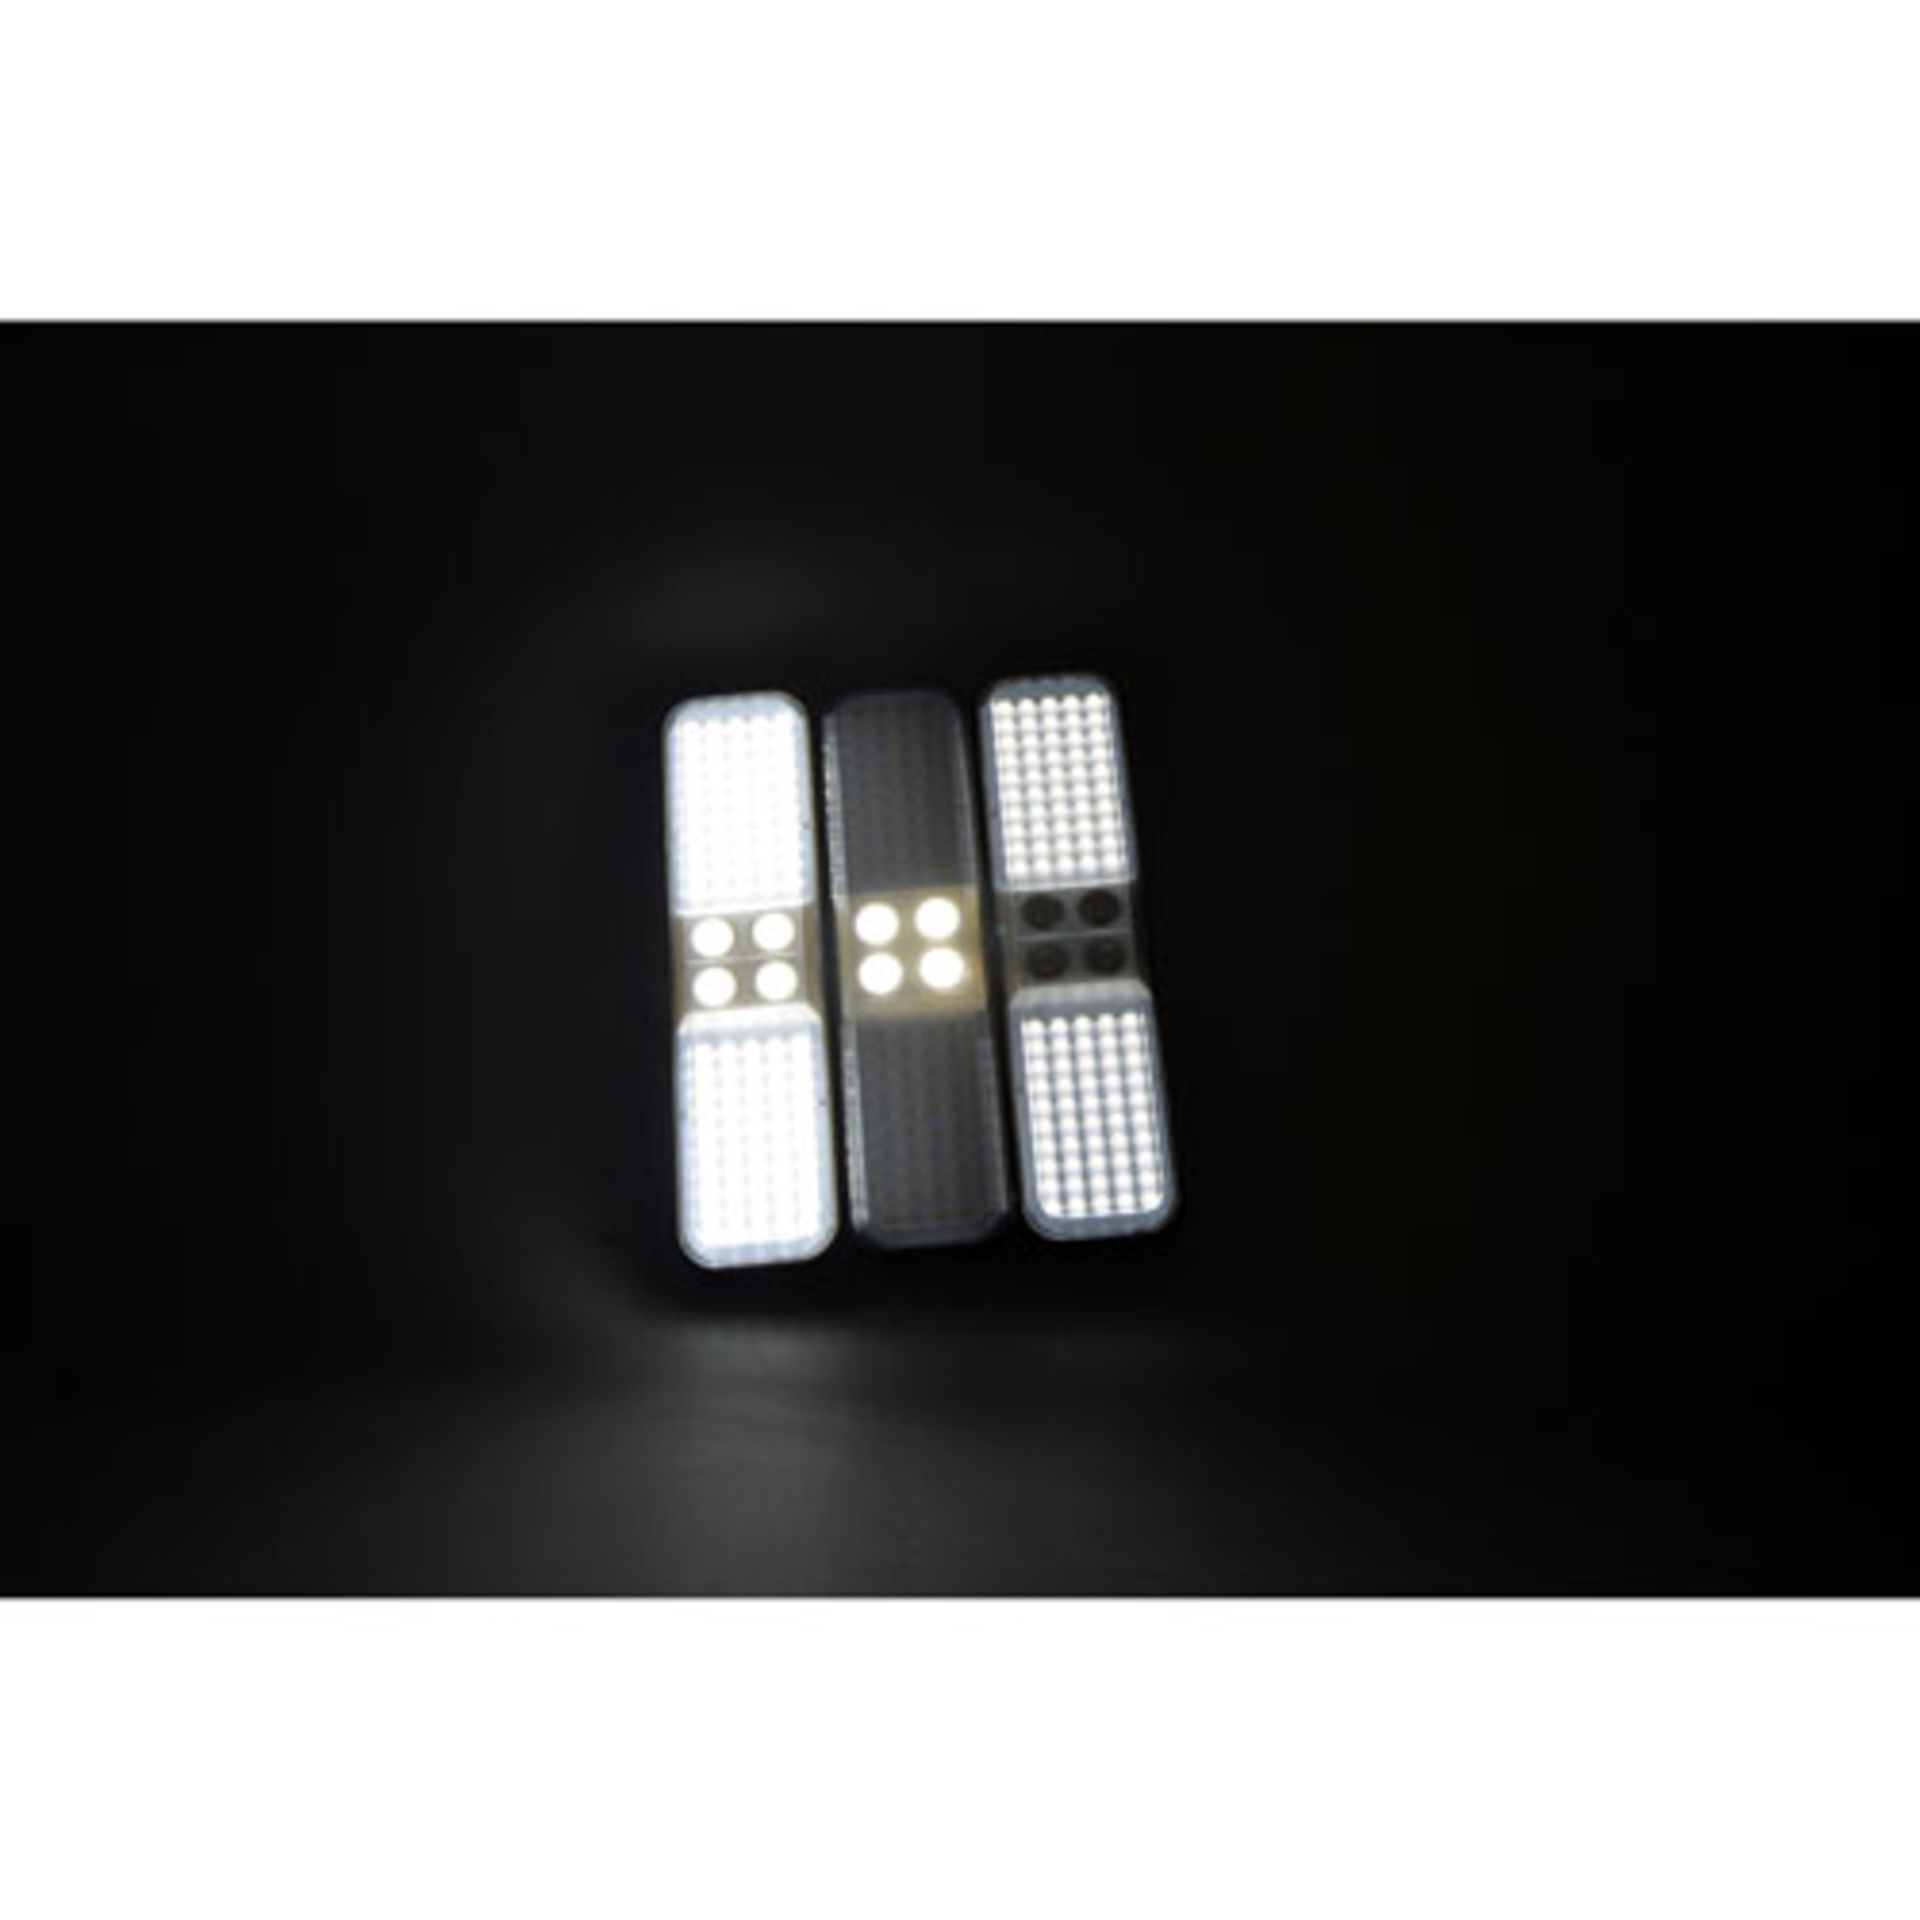 UNITS - SOLAR RECHARGEABLE LED HIGH LUMEN WORKING LIGHT / CAMPING LIGHT KIT (NEW) (MSRP $300) - Image 6 of 9